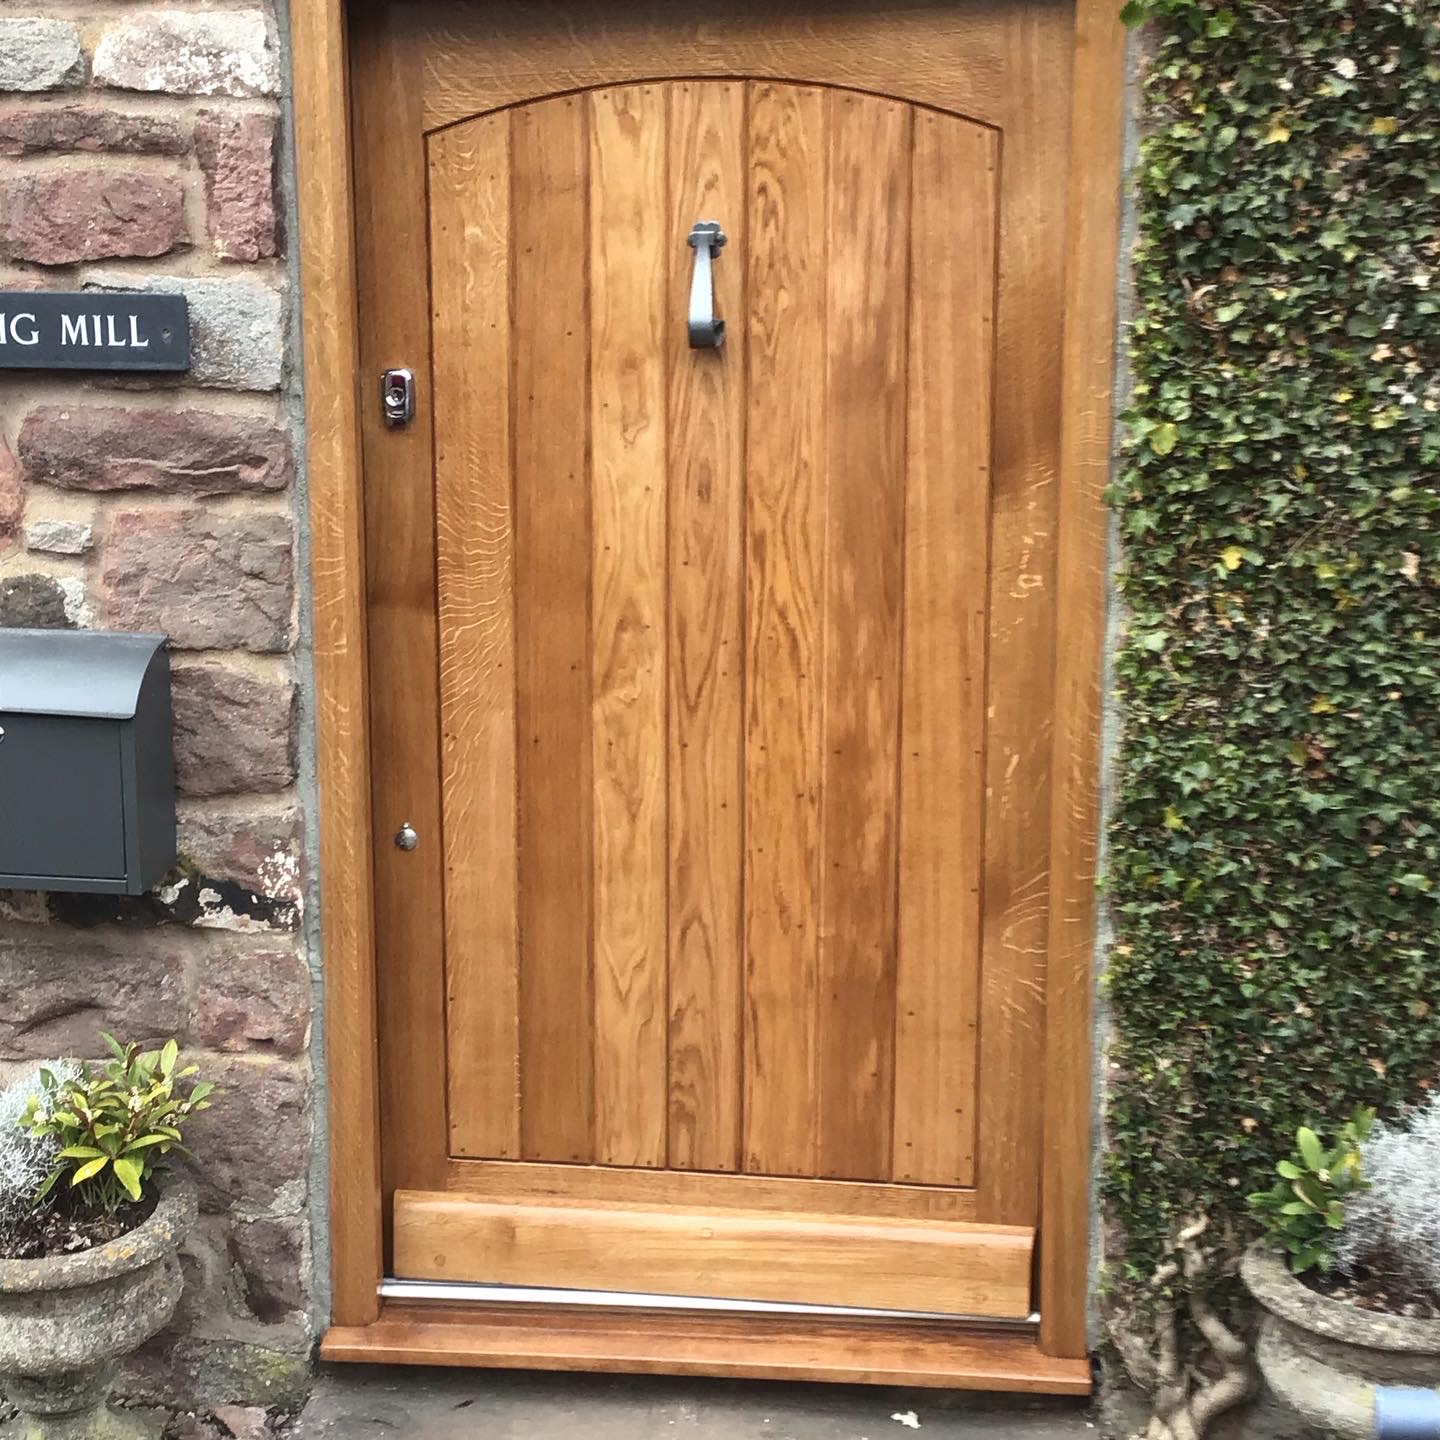 Made to measure oak door finished with osmo 420 exterior grade oil